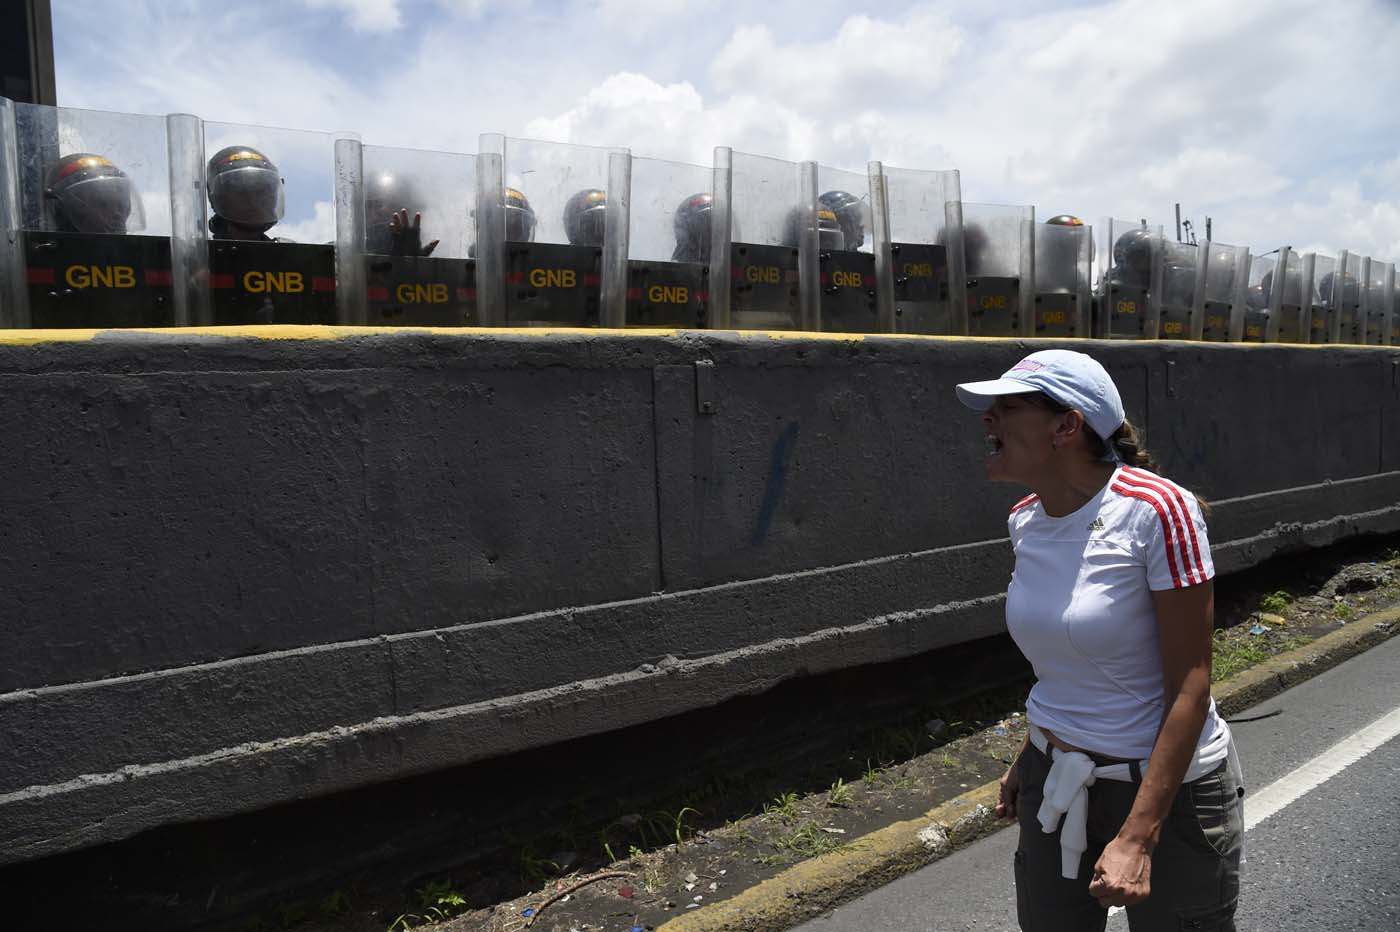 A Venezuelan opposition activist shouts at members of the Bolivarian National Guard standing guard during a women's march aimed to keep pressure on President Nicolas Maduro, whose authority is being increasingly challenged by protests and deadly unrest, in Caracas on May 6, 2017. The death toll since April, when the protests intensified after Maduro's administration and the courts stepped up efforts to undermine the opposition, is at least 36 according to prosecutors. / AFP PHOTO / JUAN BARRETO